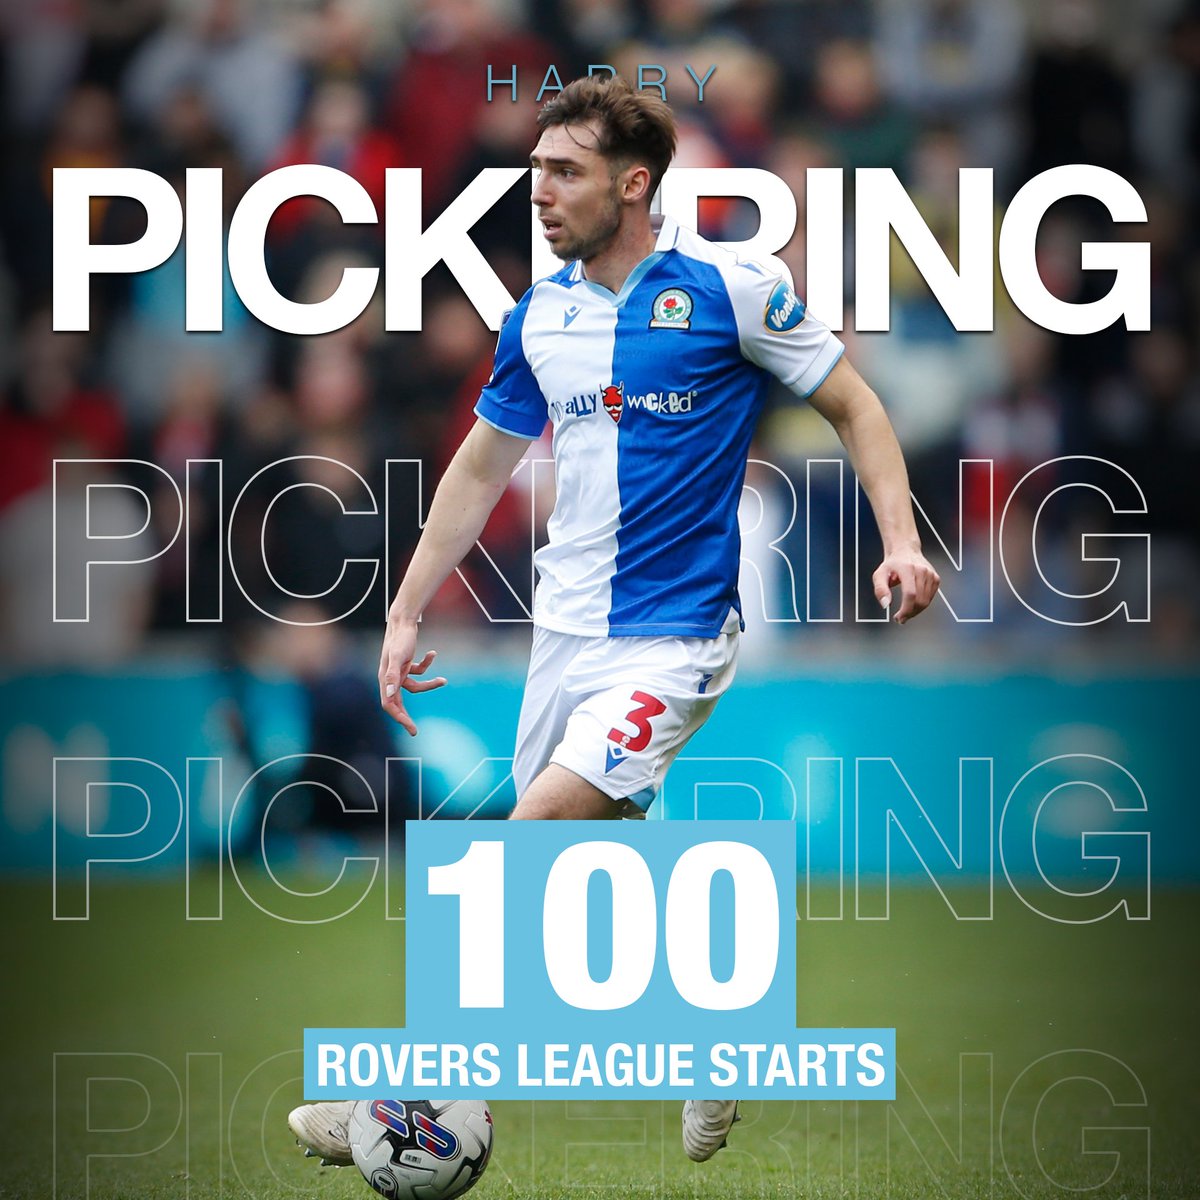 💯 @harrypickering_ makes his 100th #Rovers league start, as well as his 250th career league appearance! 👏 #ROVvSOU 🔵⚪️